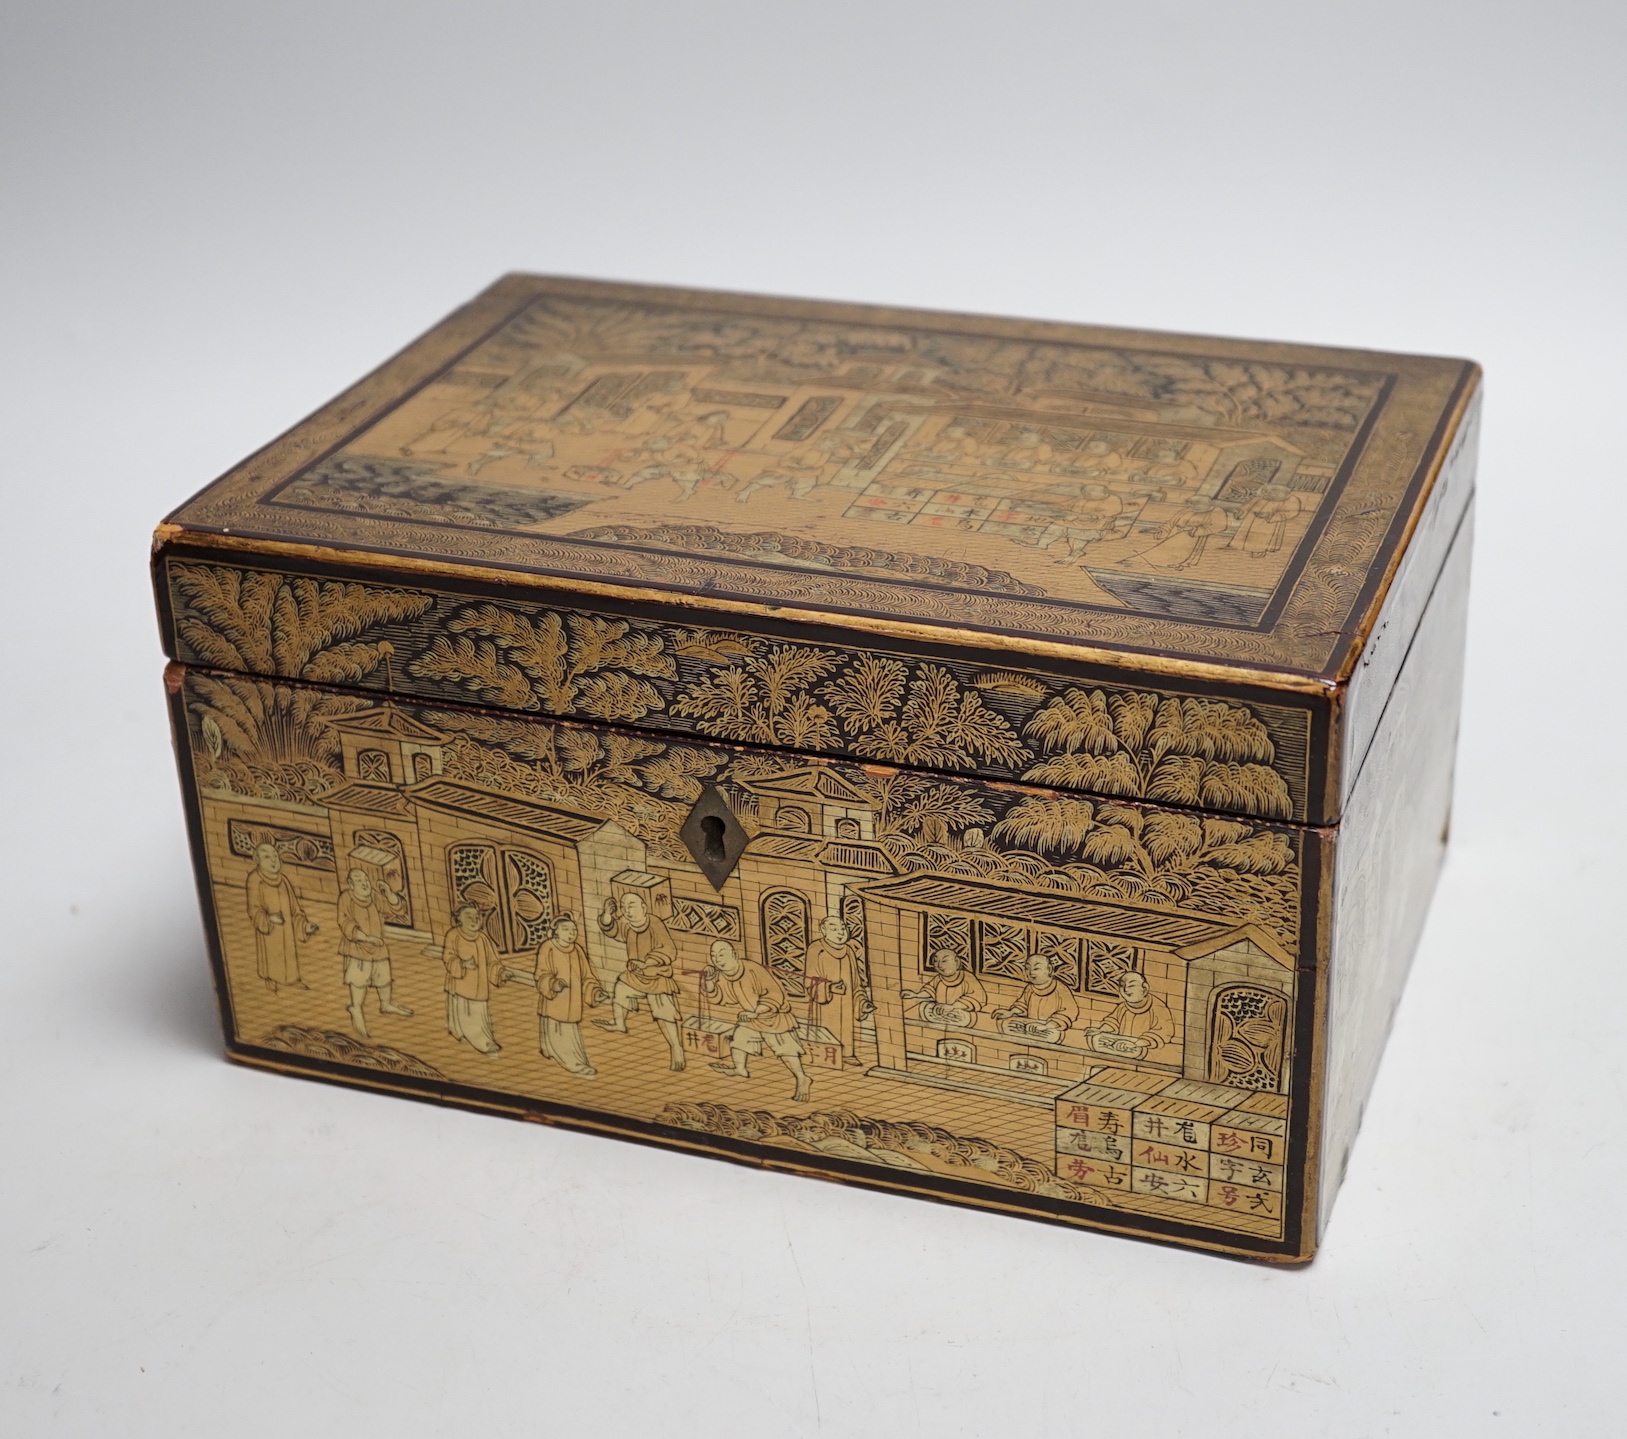 A 19th century Chinese export lacquer tea caddy, black ground with gilt decoration, containing a separate lidded pewter lining box with engraved decoration, 23cm x 16cm x 12cm